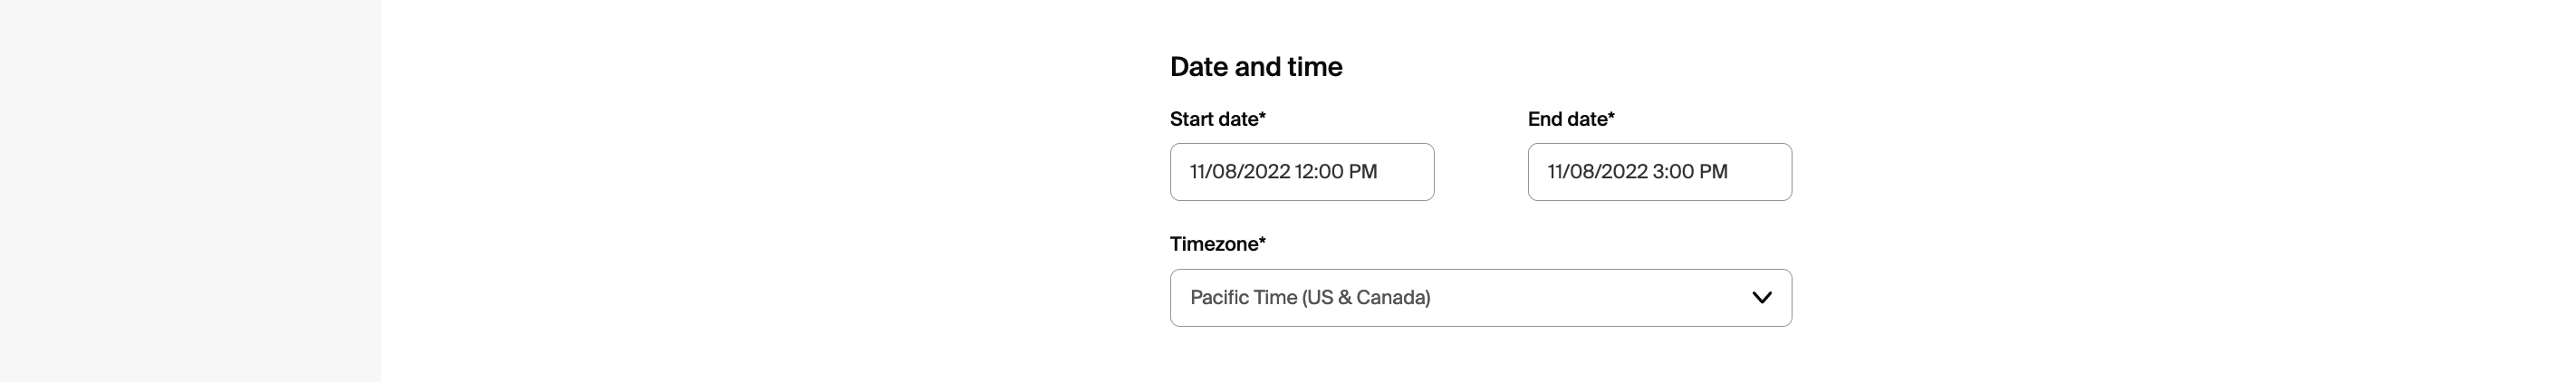 Date_and_Time.png